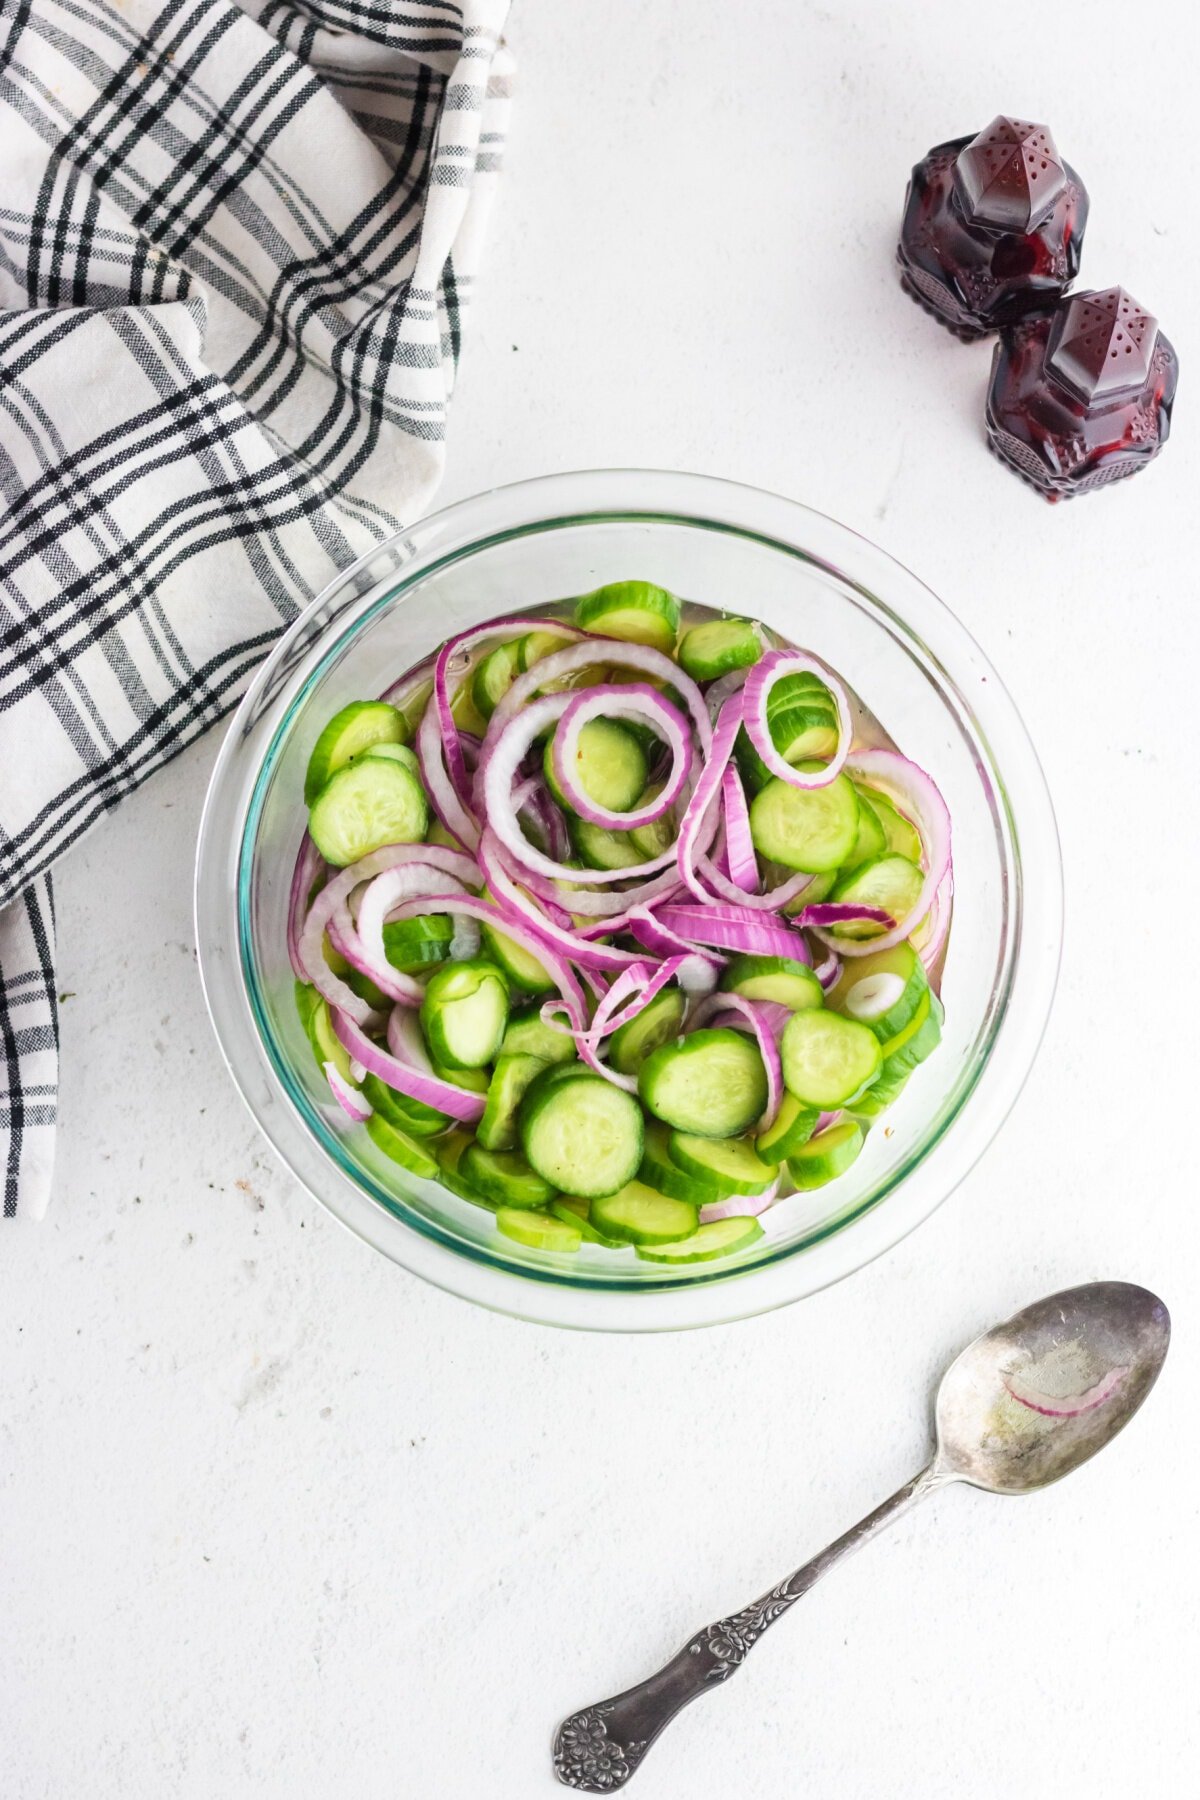 Overhead view of finished cucumber salad in a glass bowl.